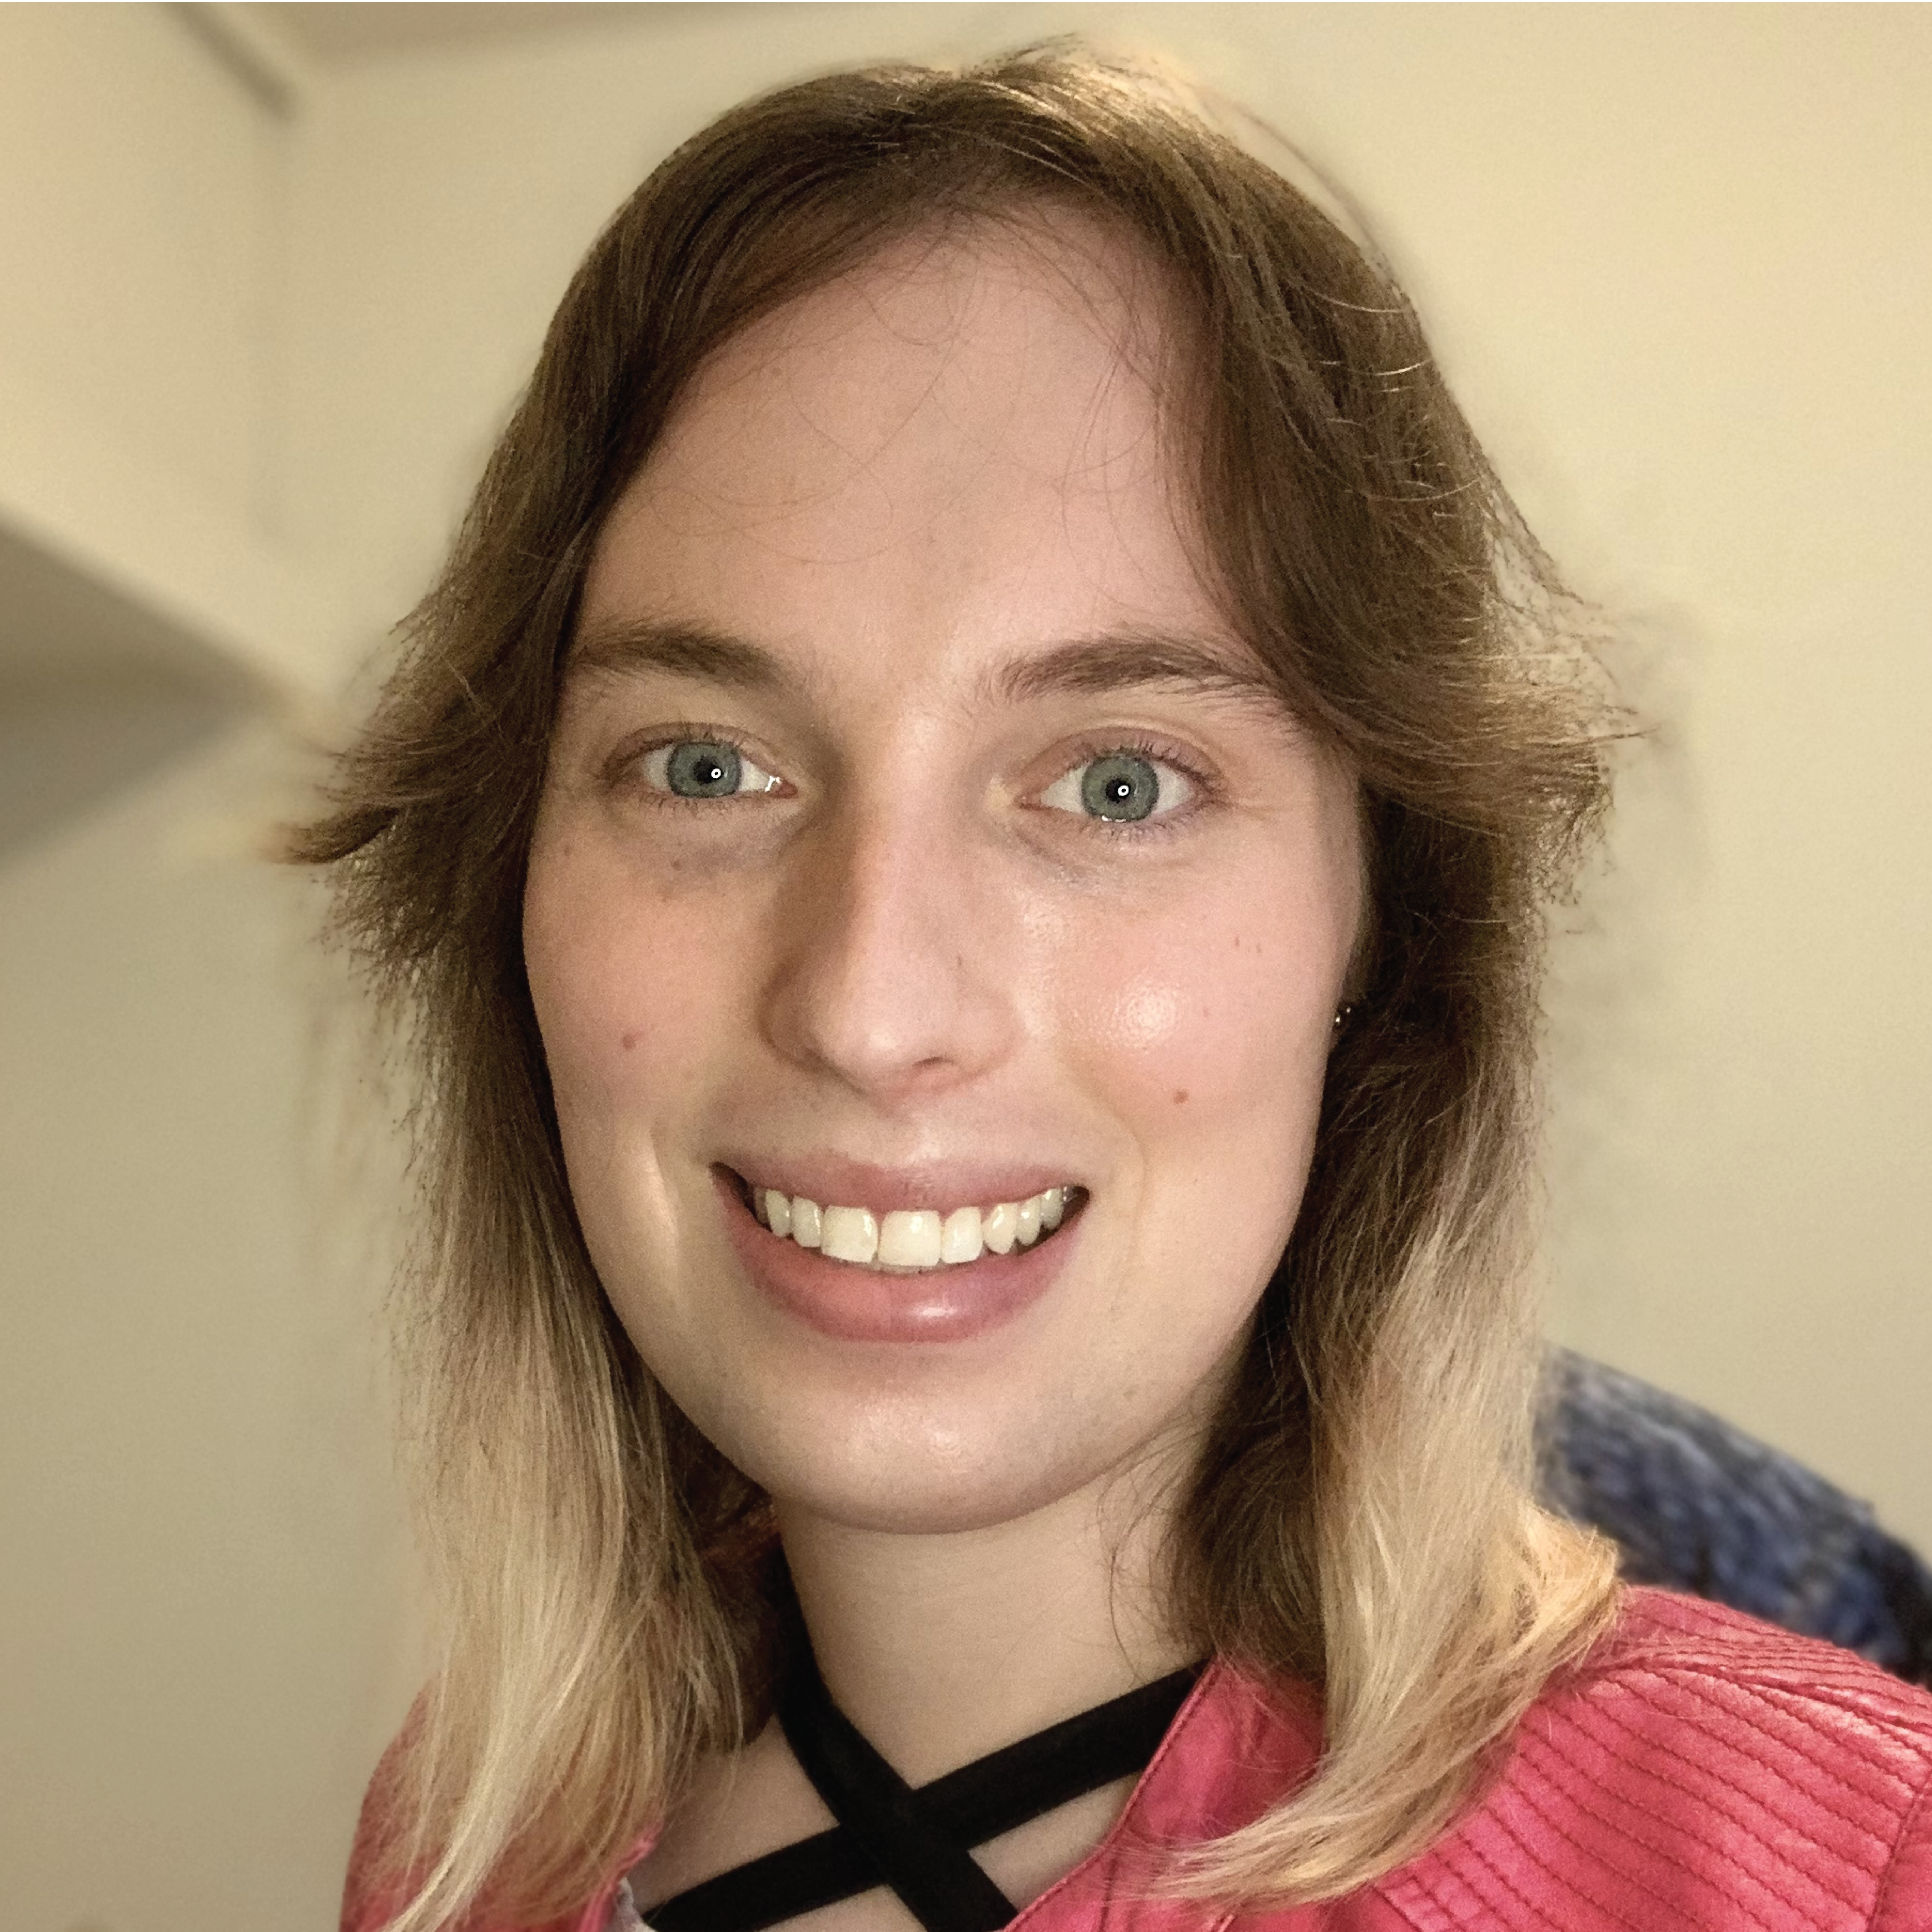 A white non-binary person with blue eyes and light brown hair with blond highlights wearing a pink jacket and a white shirt with black horizontal stripes